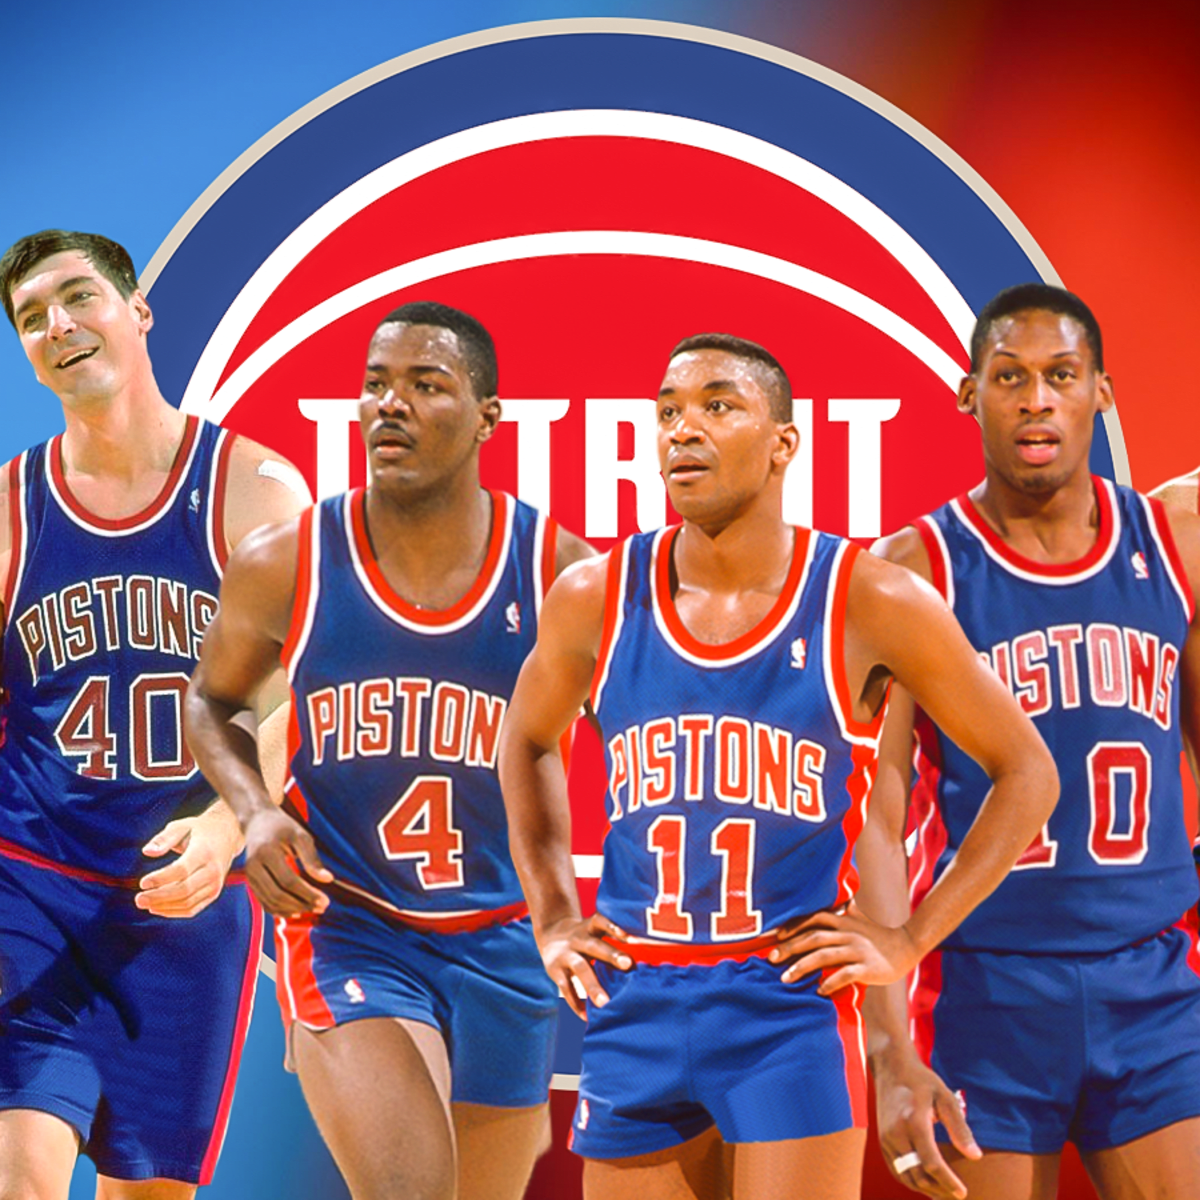 Why were the Detroit Pistons in the 80s called the Bad Boys? - Quora